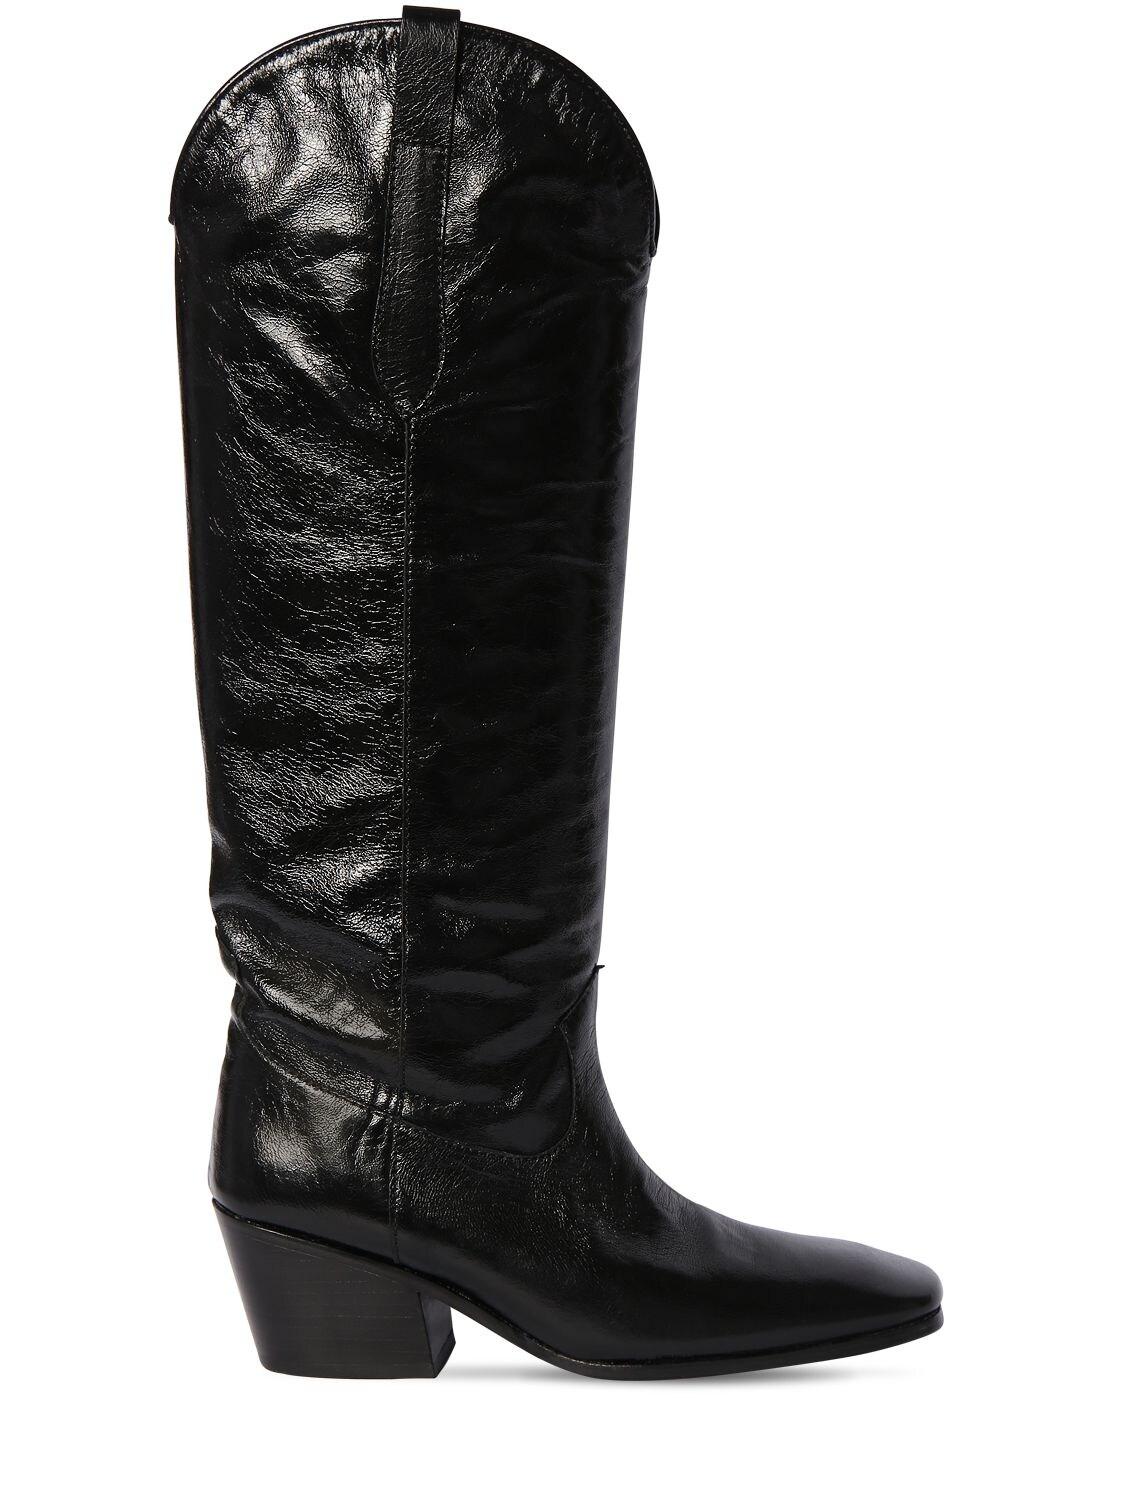 BY FAR 60mm Willa Creased Leather Tall Boots in Black - Lyst